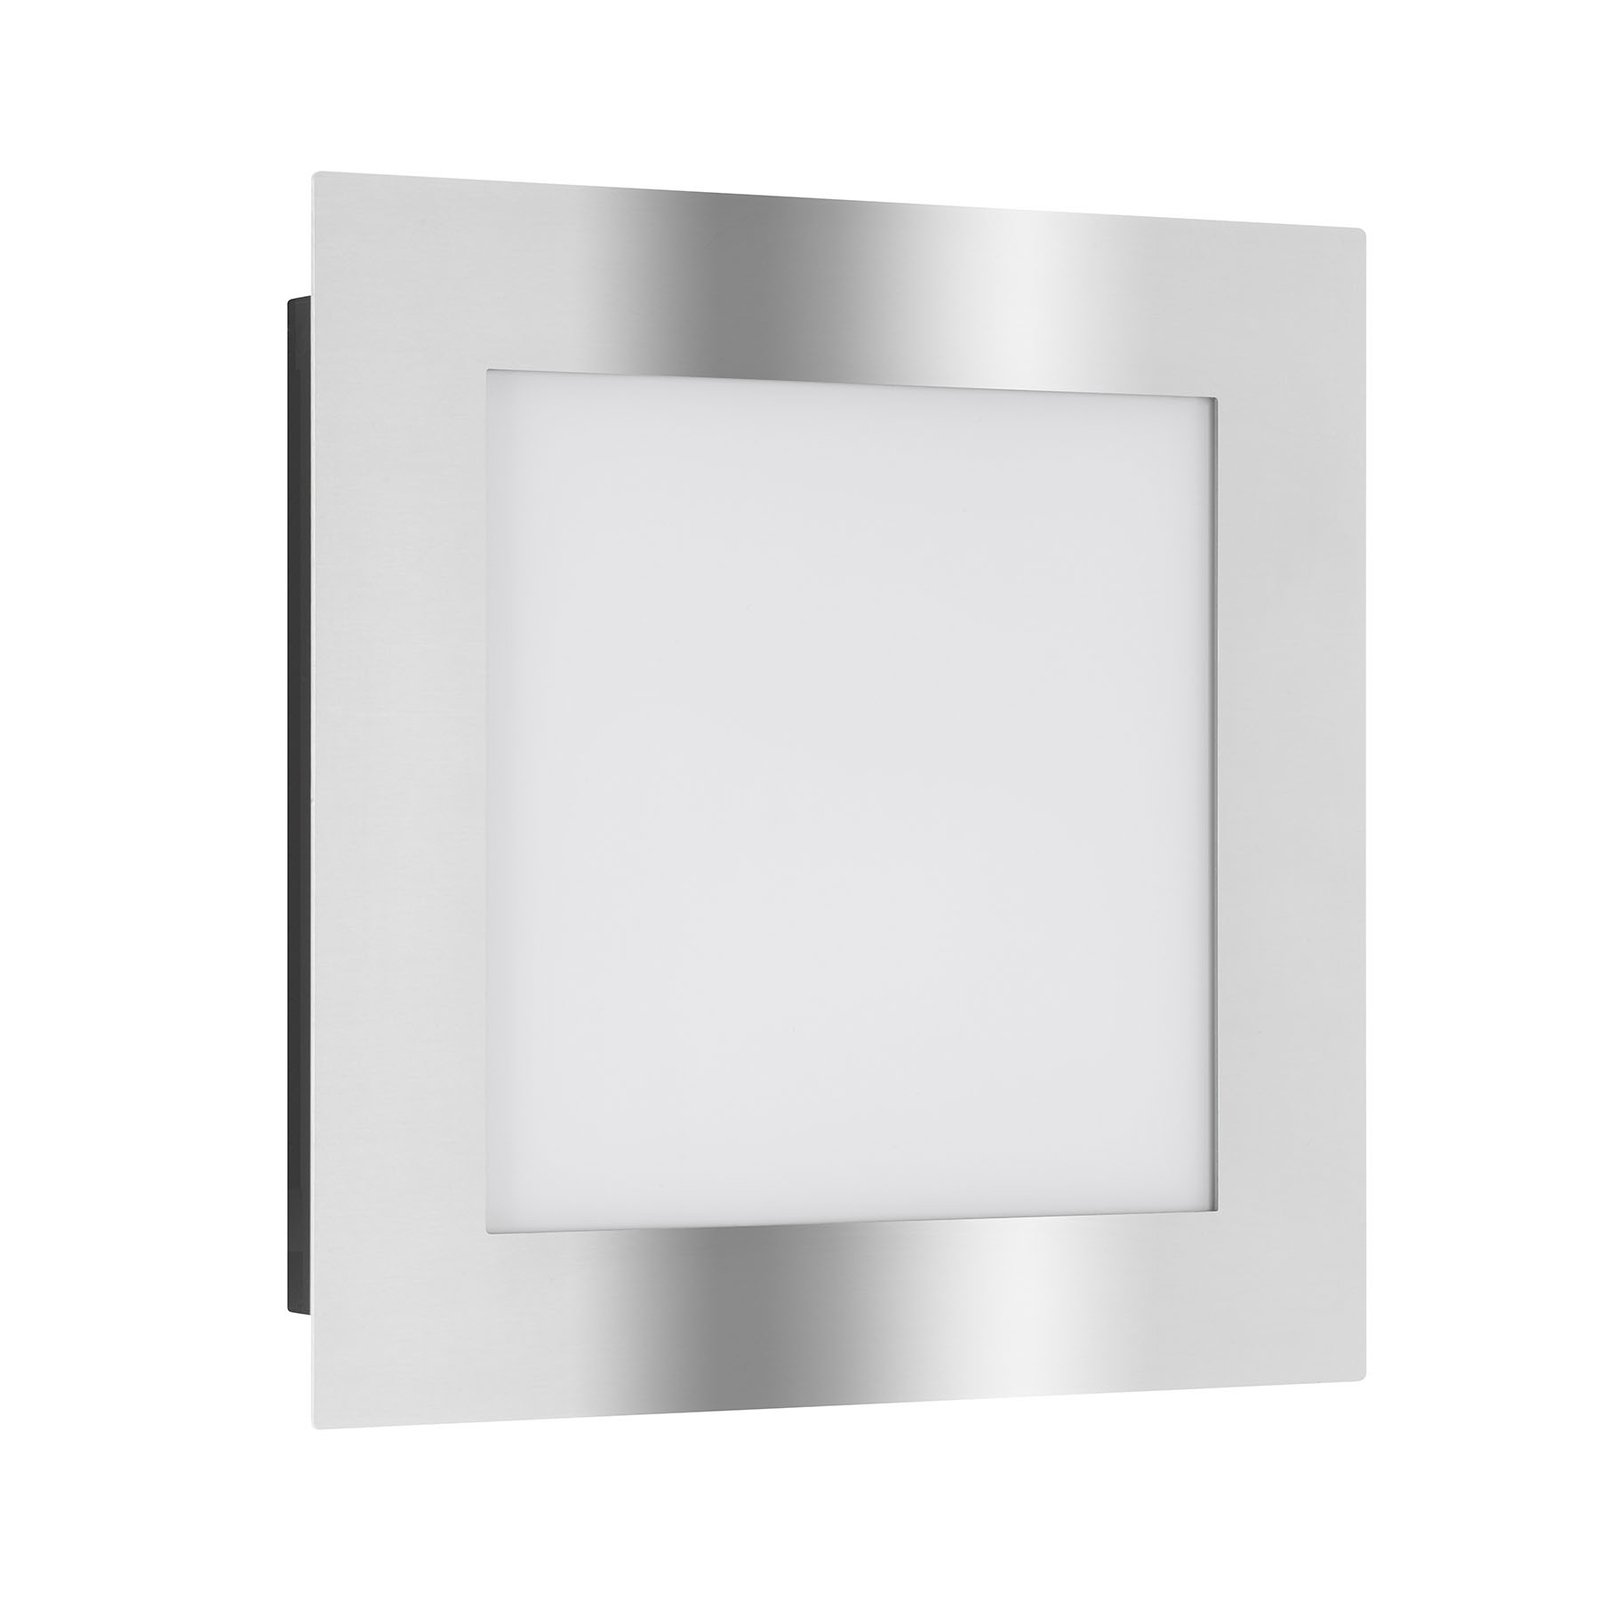 3006 LED outdoor wall light with motion sensor